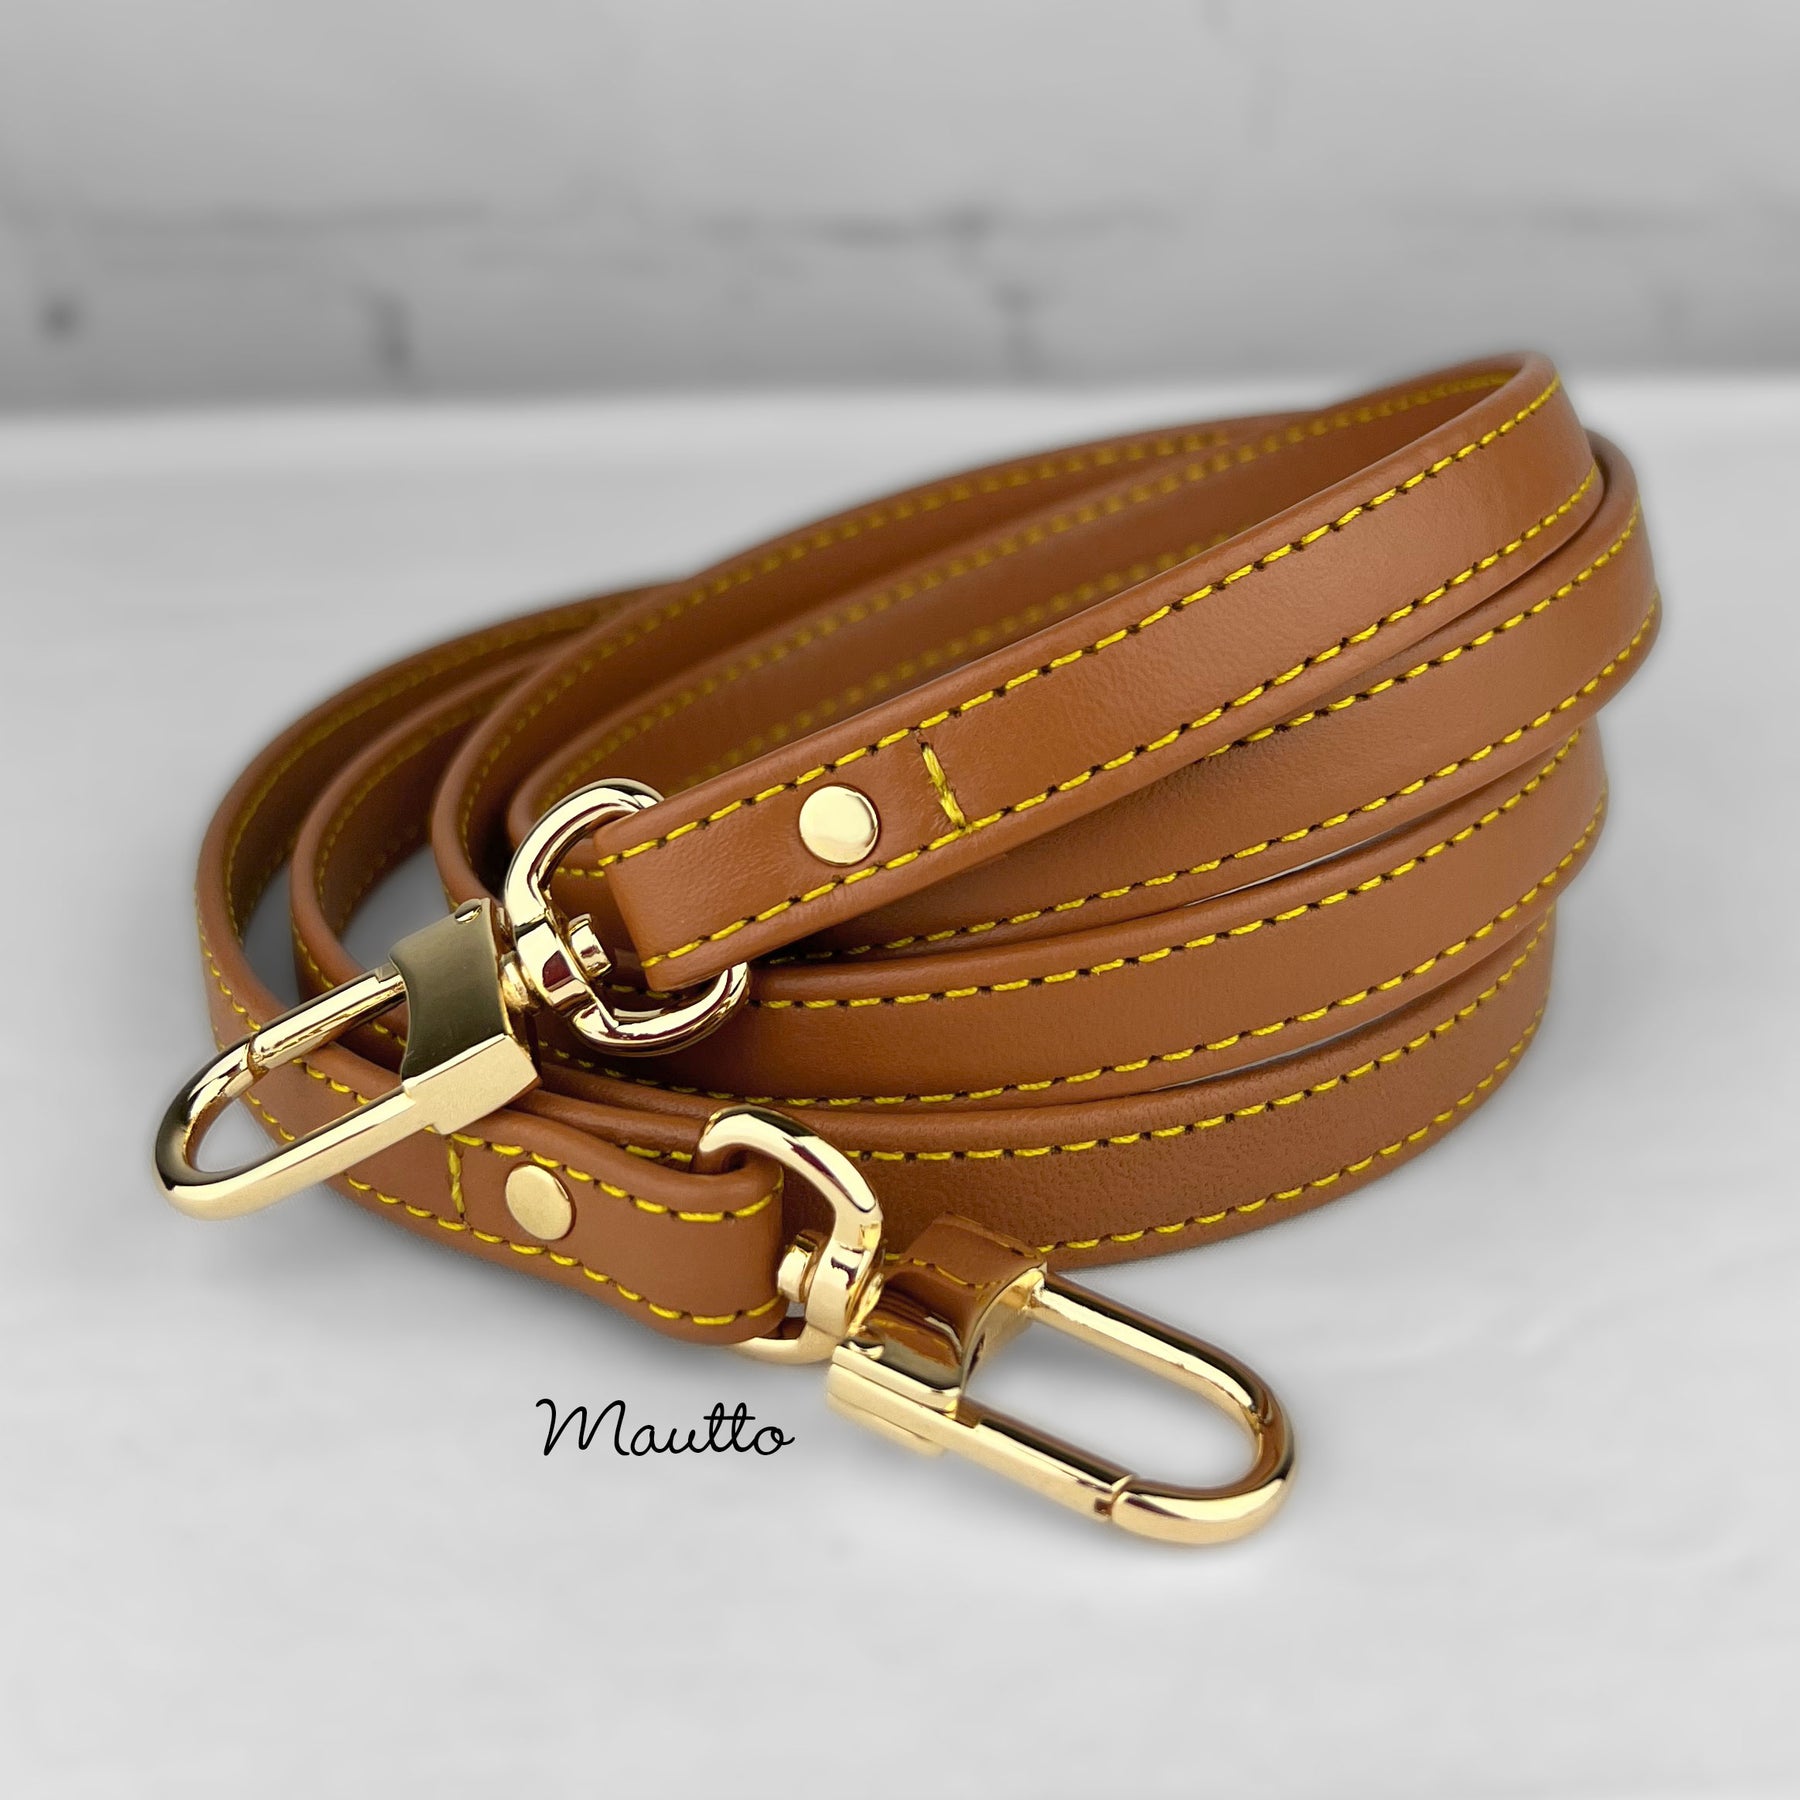 Mautto Tan Leather Strap with Yellow Stitching for Petite Louis Vuitton Bags Dark Tan Leather / 45-65 Extra Long Crossbody / Silver-Tone